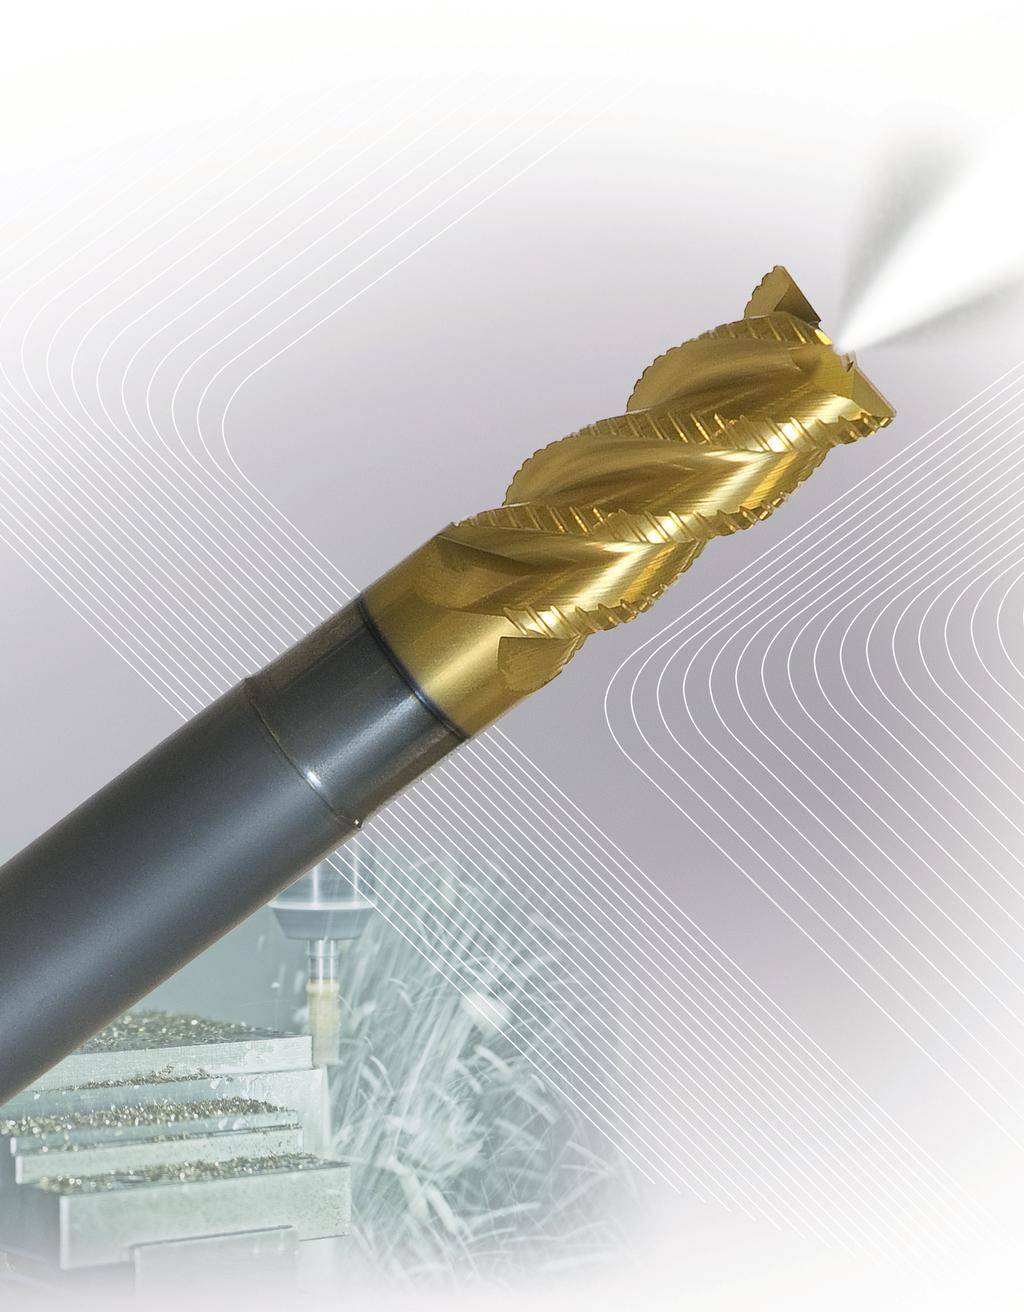 Tiox-Cut igh Performance Roughing End Mills for Aerospace machining and other demanding plications.